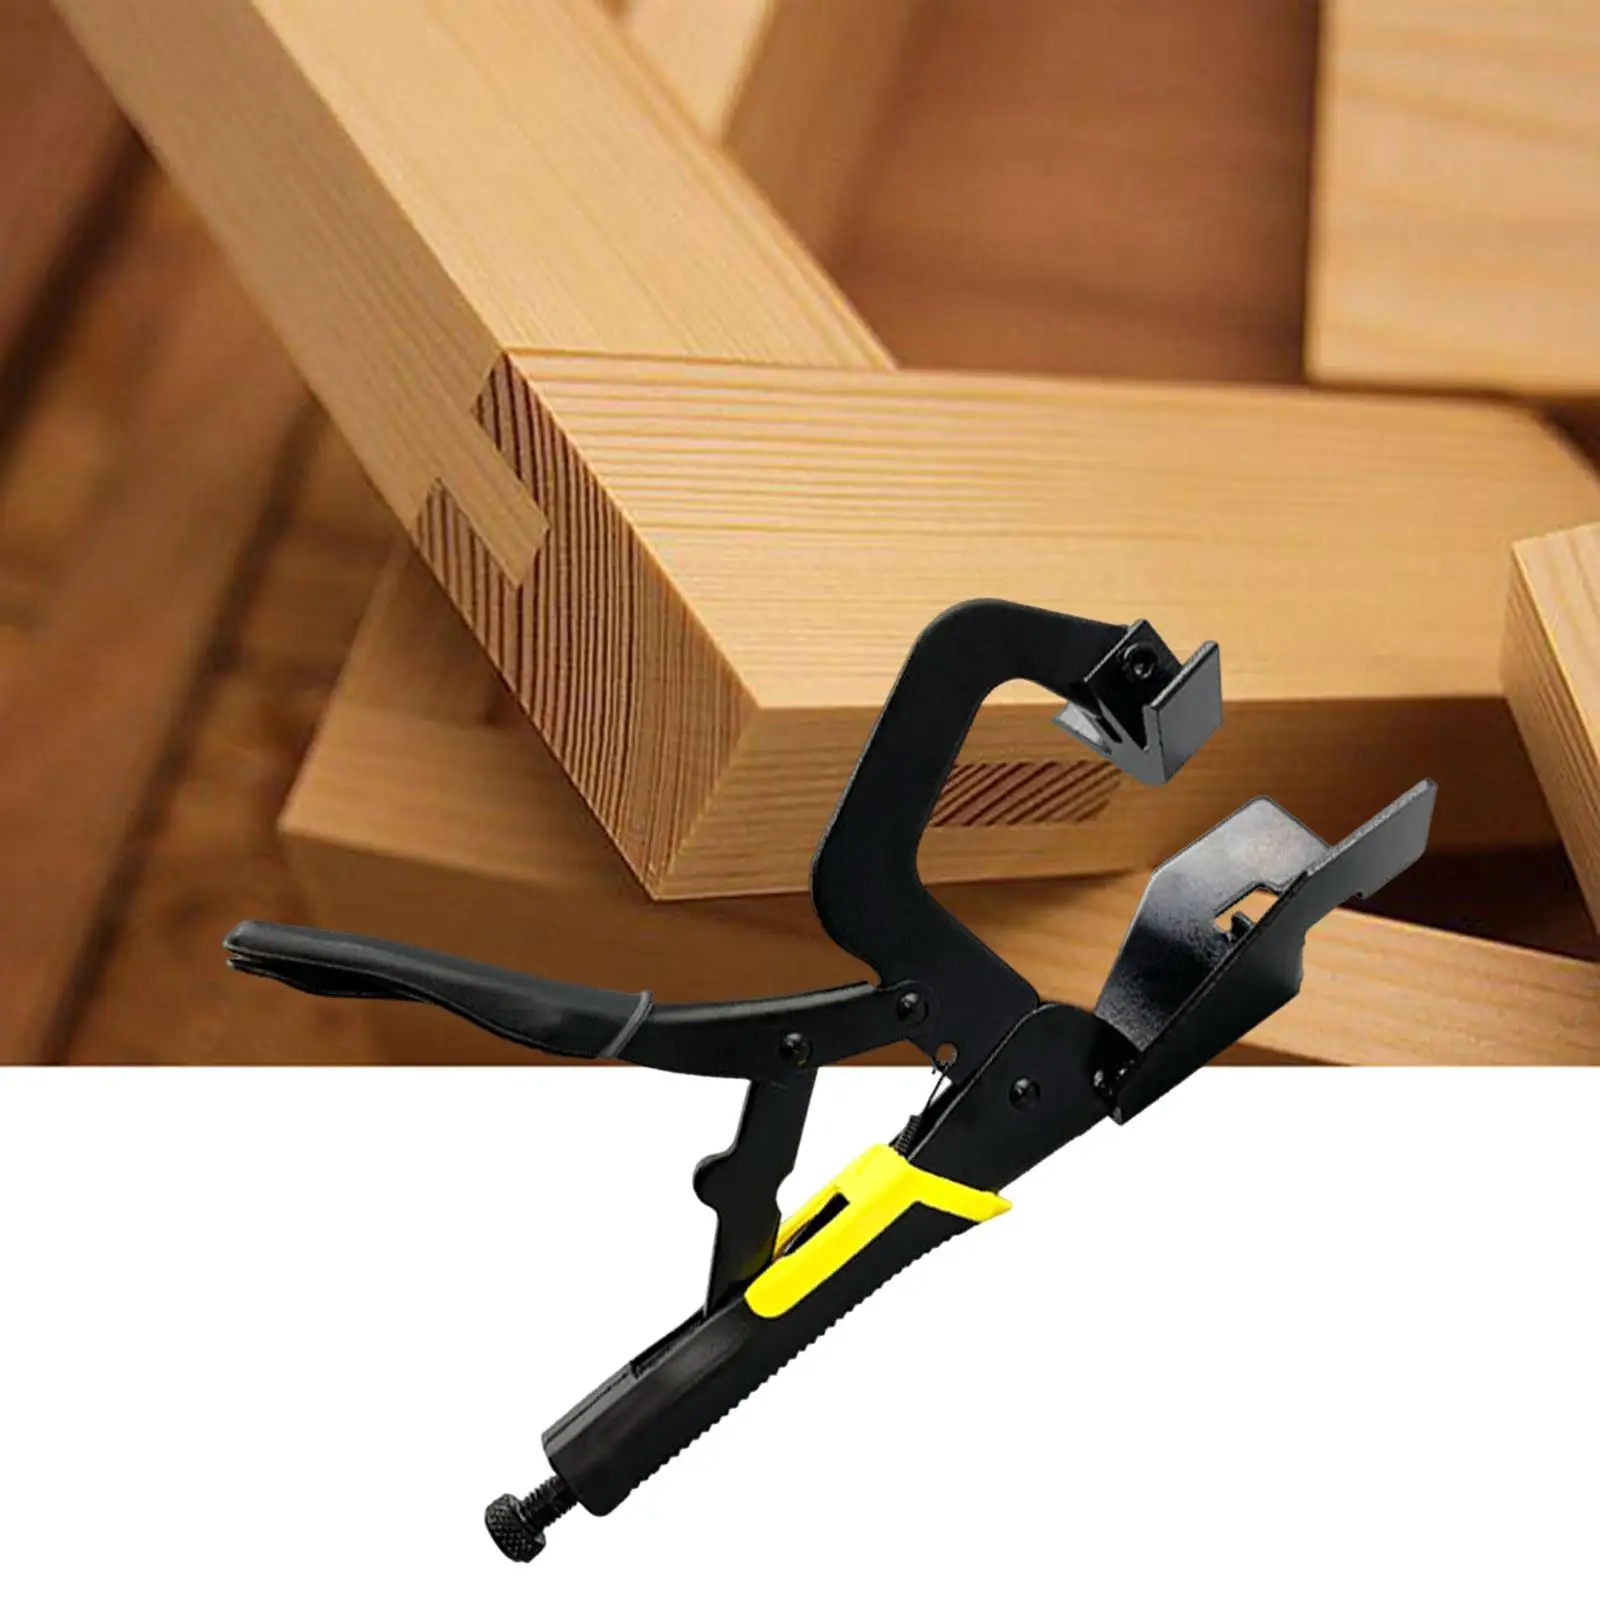 

Right Angle Clamps Hand Held Ergonomic Handle Corner Clamp Woodworking Tools for Carpenter Drawers Photo Framing Welding